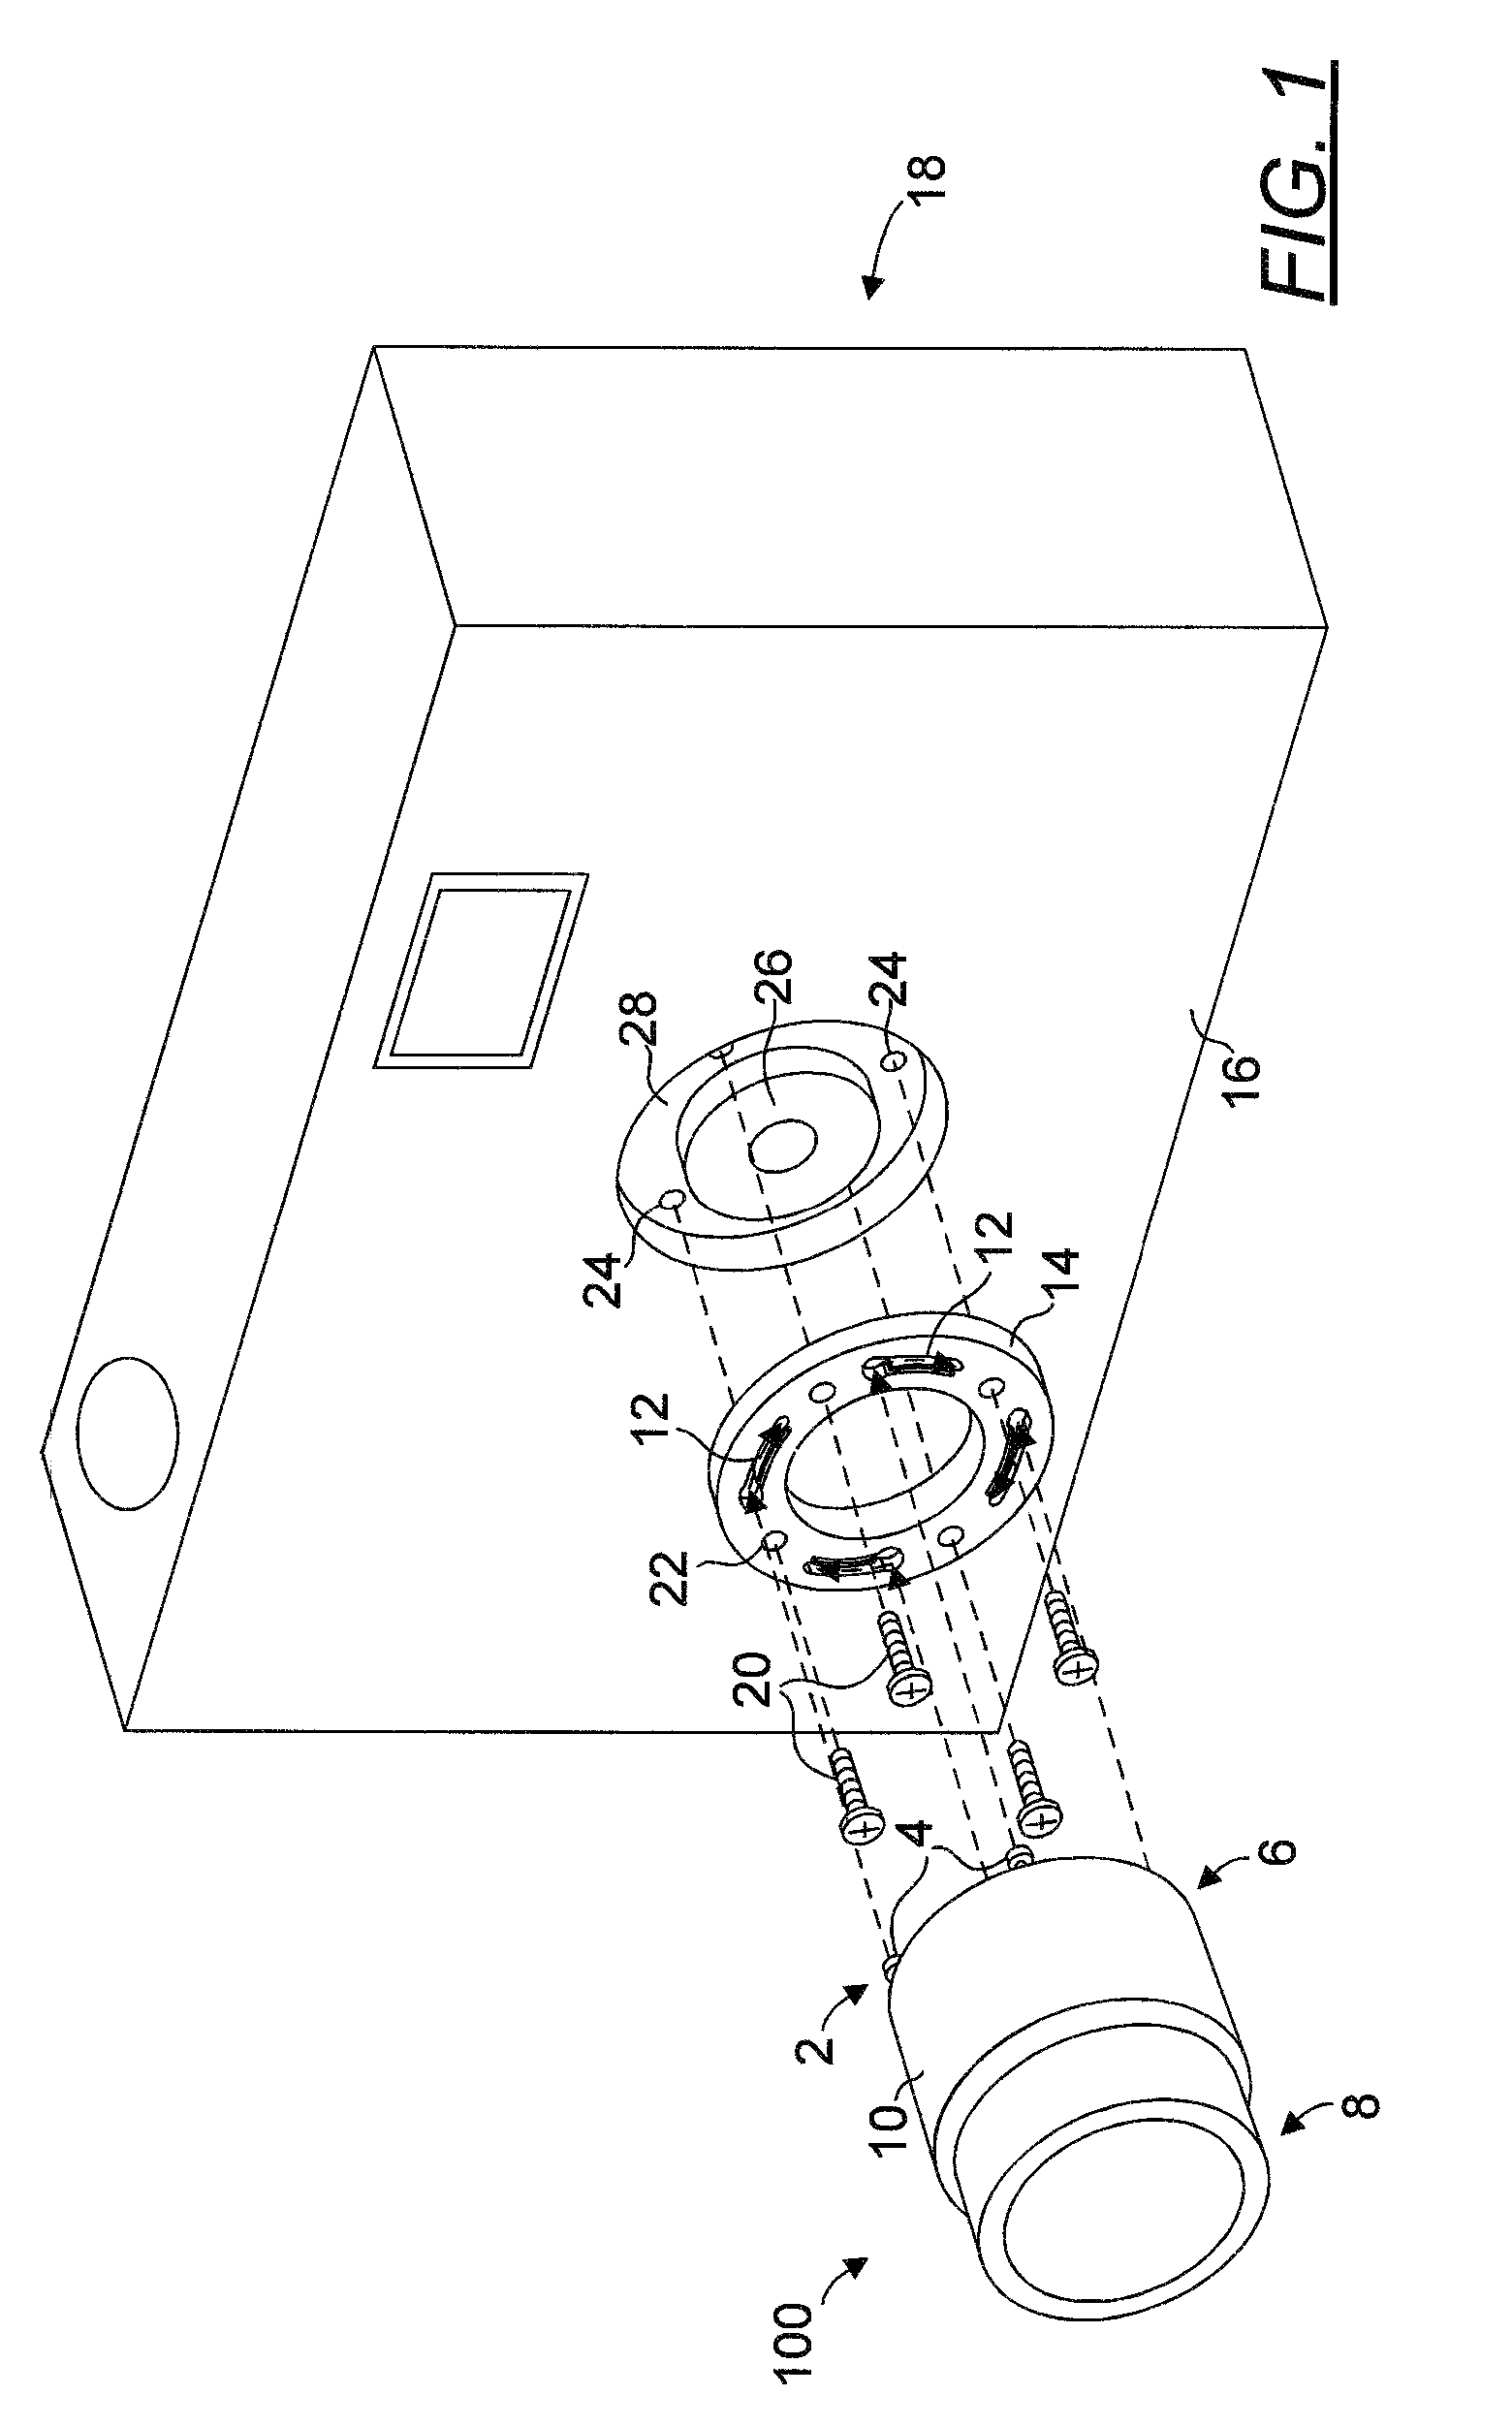 Lens and display accessory for portable imaging device